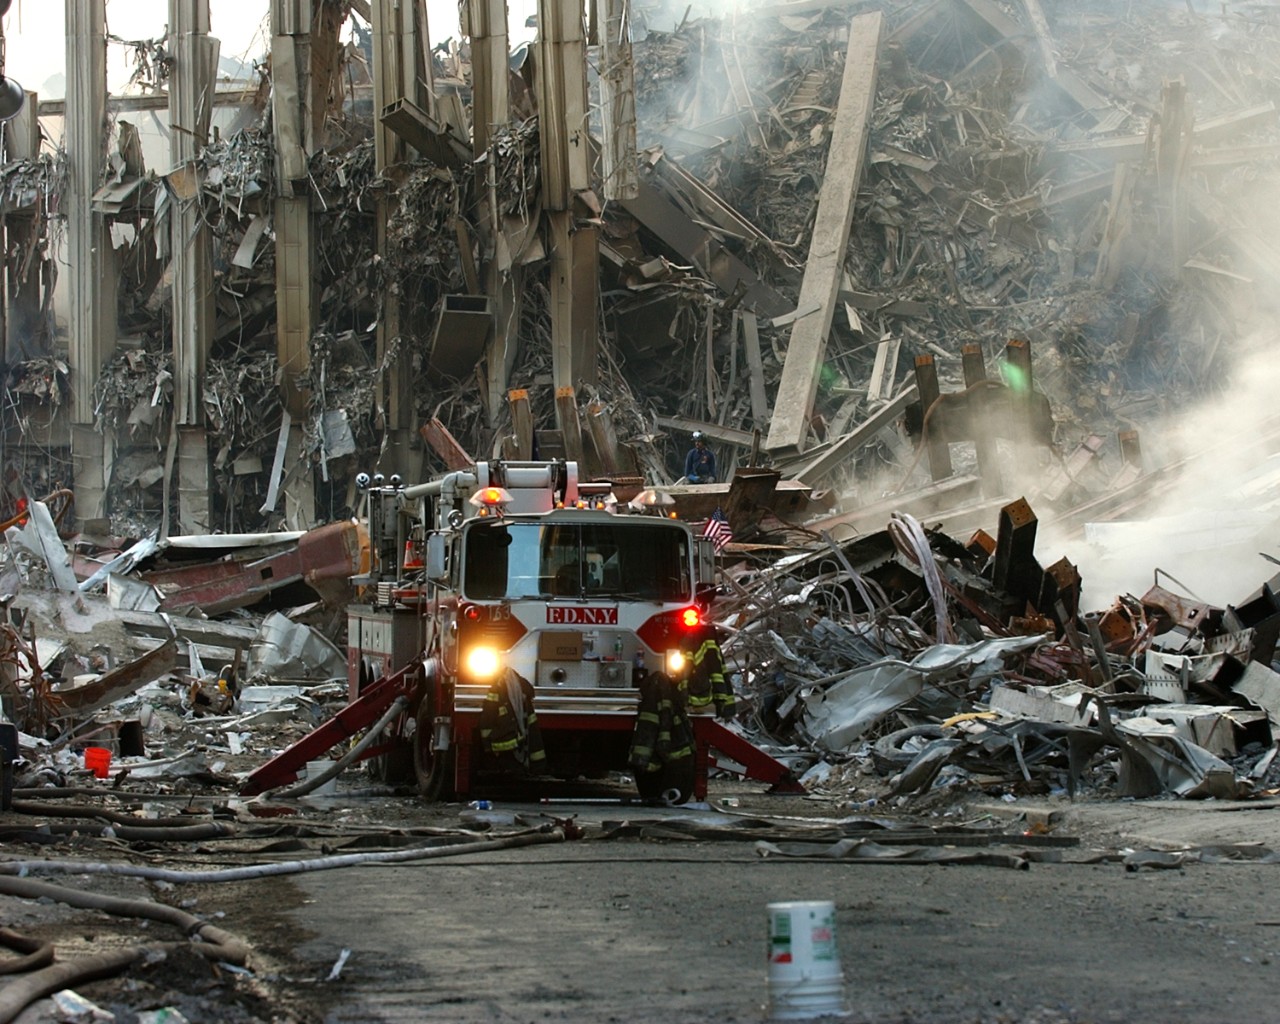 A lone fire engine sits amid the smoldering rubble of the World Trade Center while search and rescue operations continue, 16 September 2001